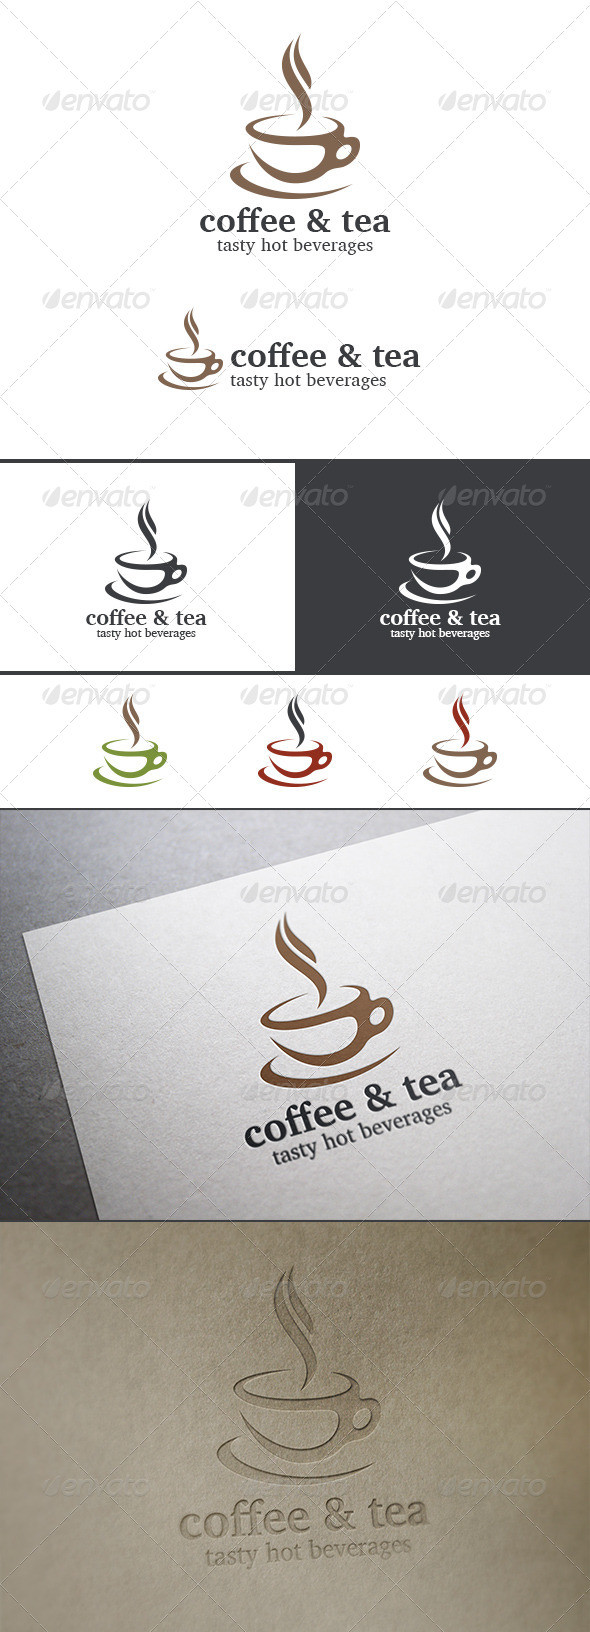 Coffee tea image preview